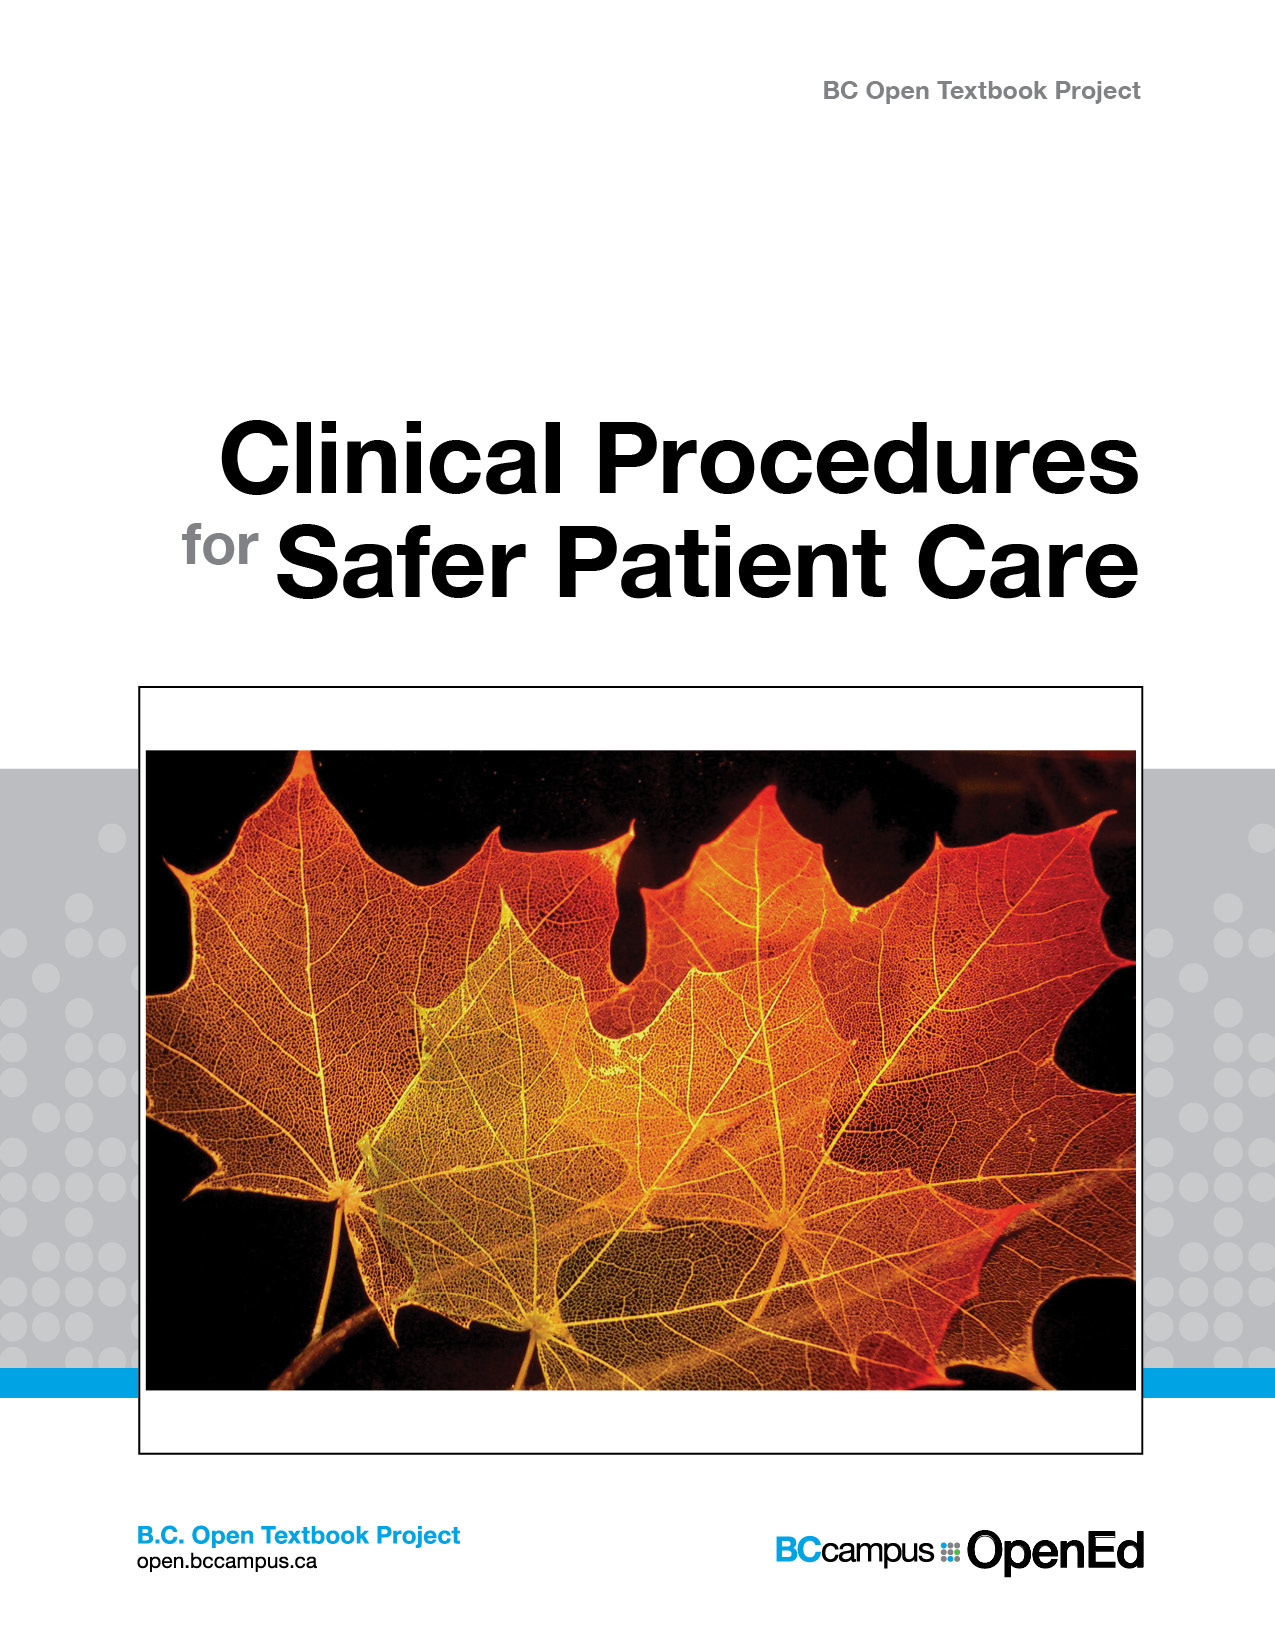 "Clinical Procedures for Safer Patient Care" icon